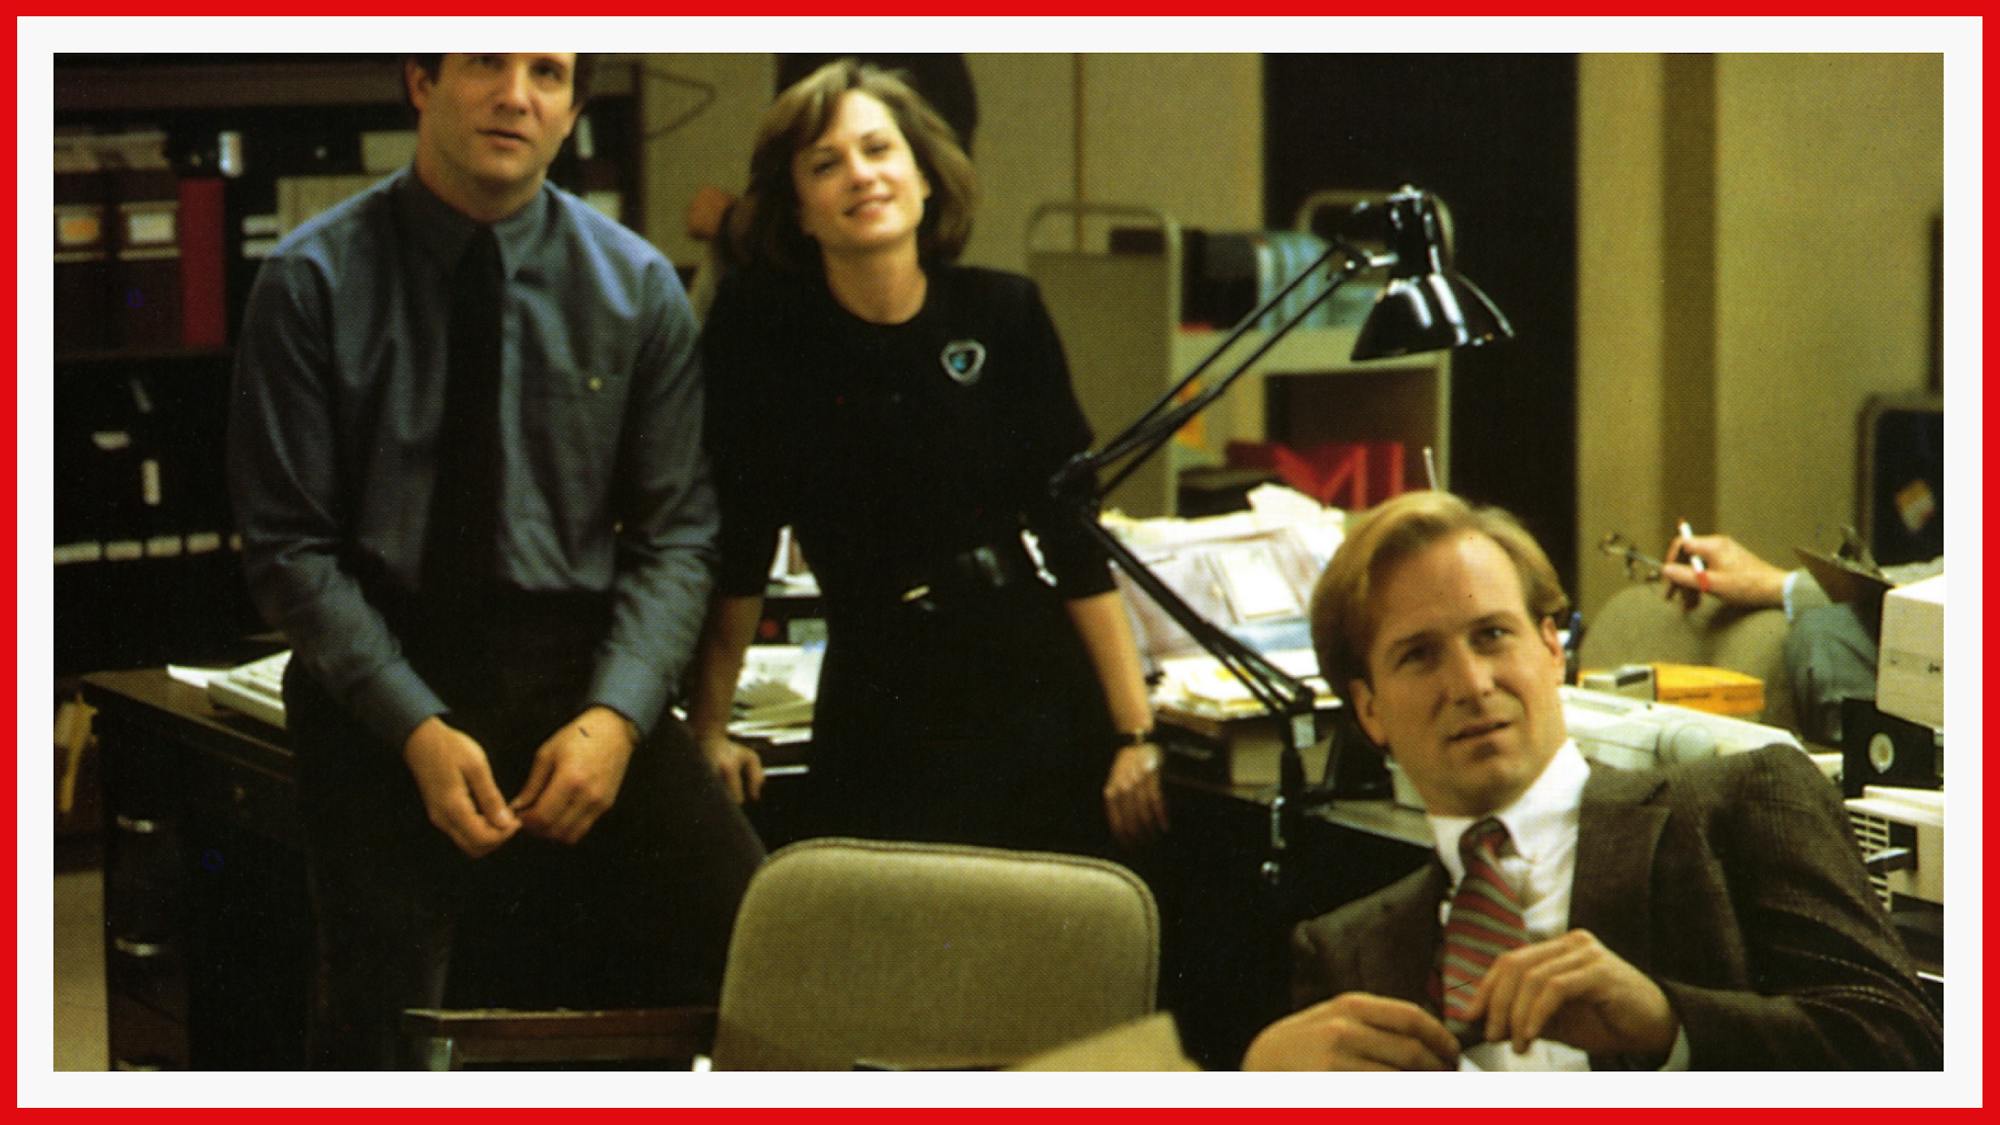 Brooks, Hunter, and Hurt in a scene from the film. They are pictured in a messy newsroom office.